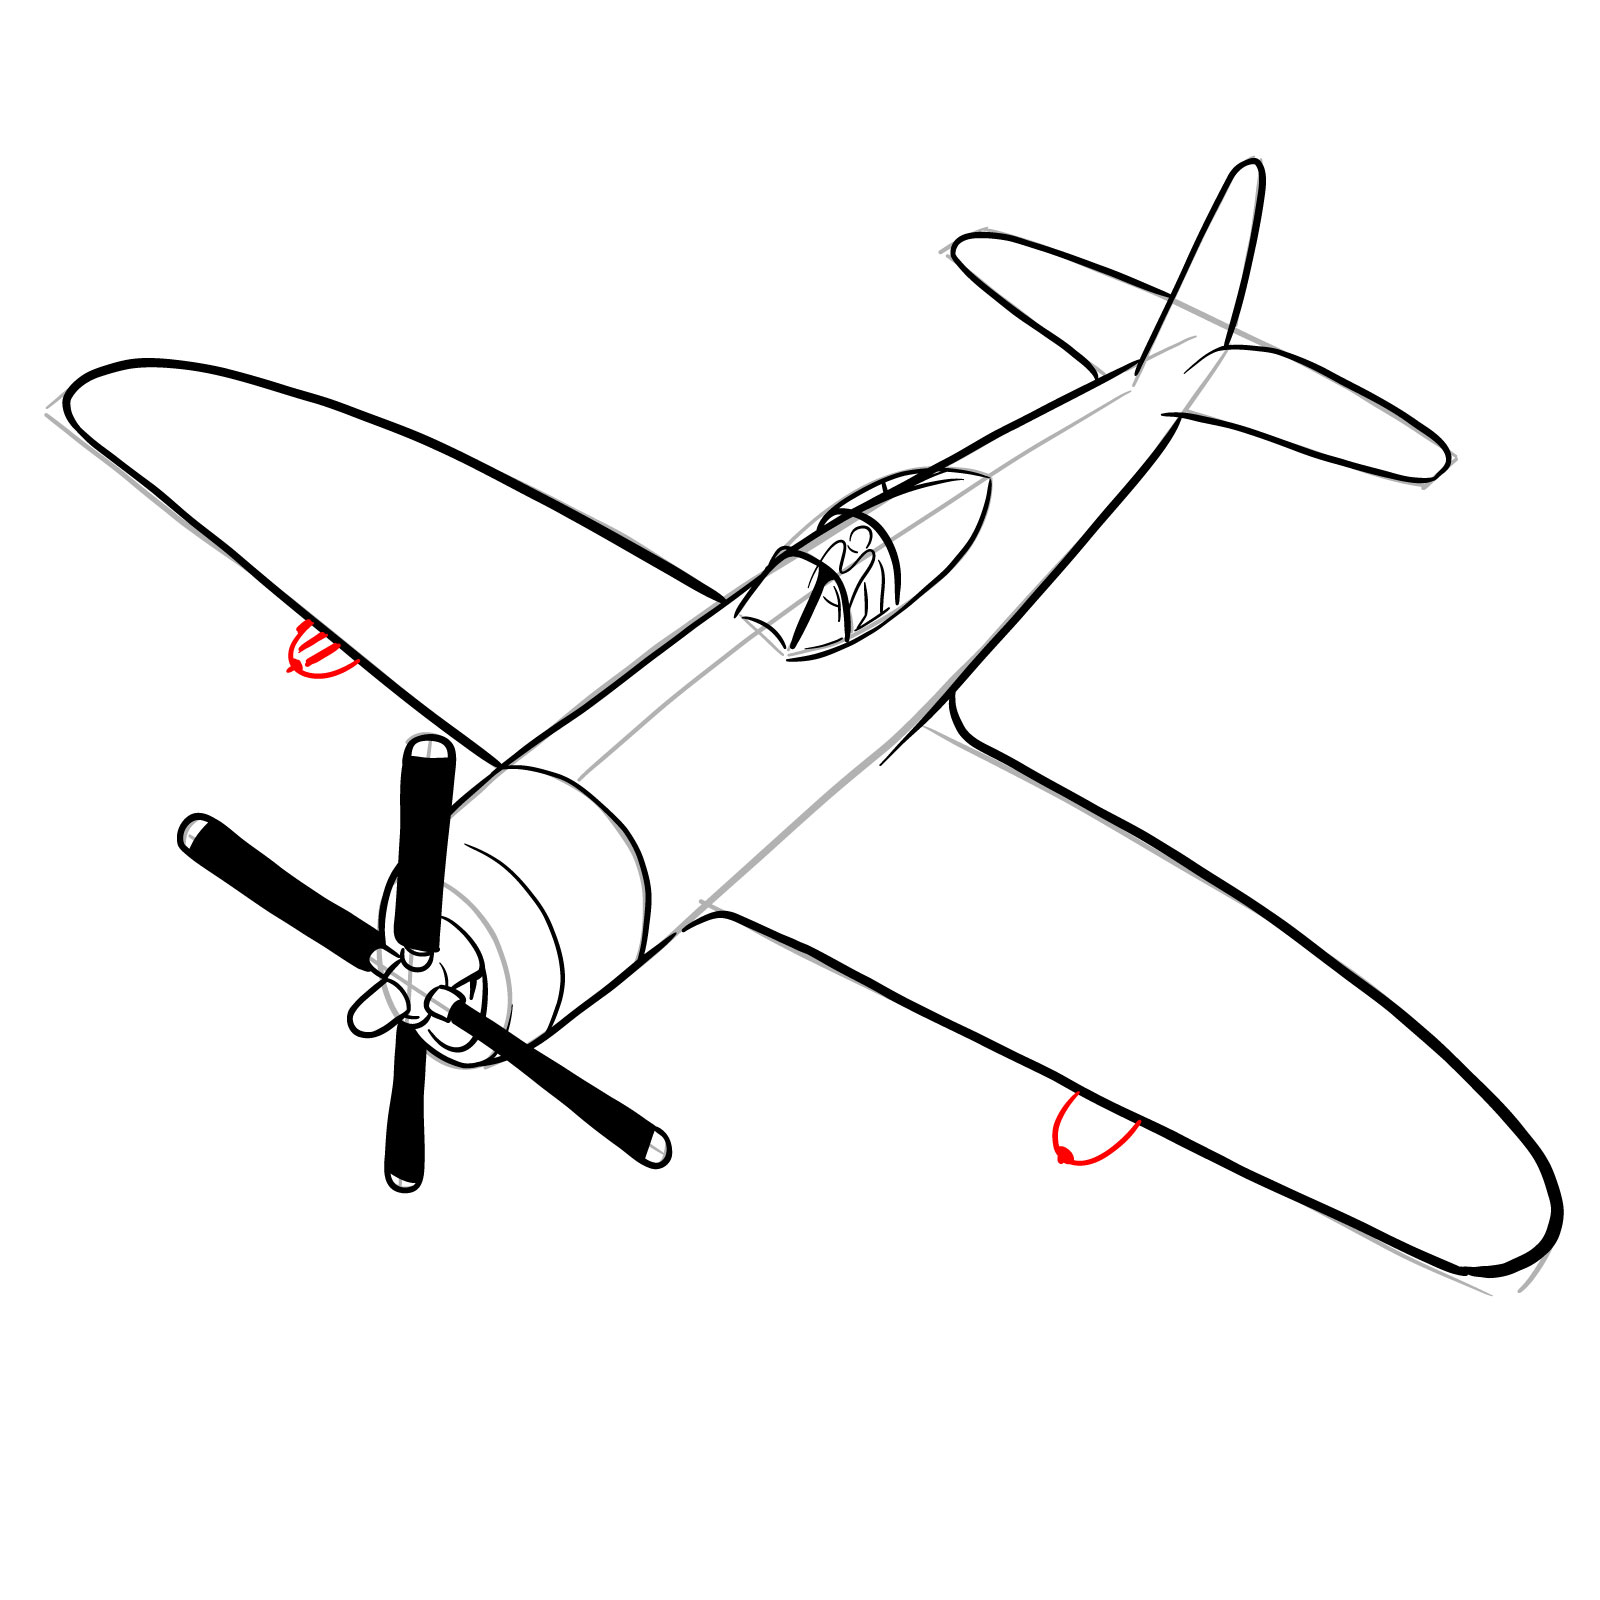 How to draw the Republic P-47 Thunderbolt - step 22